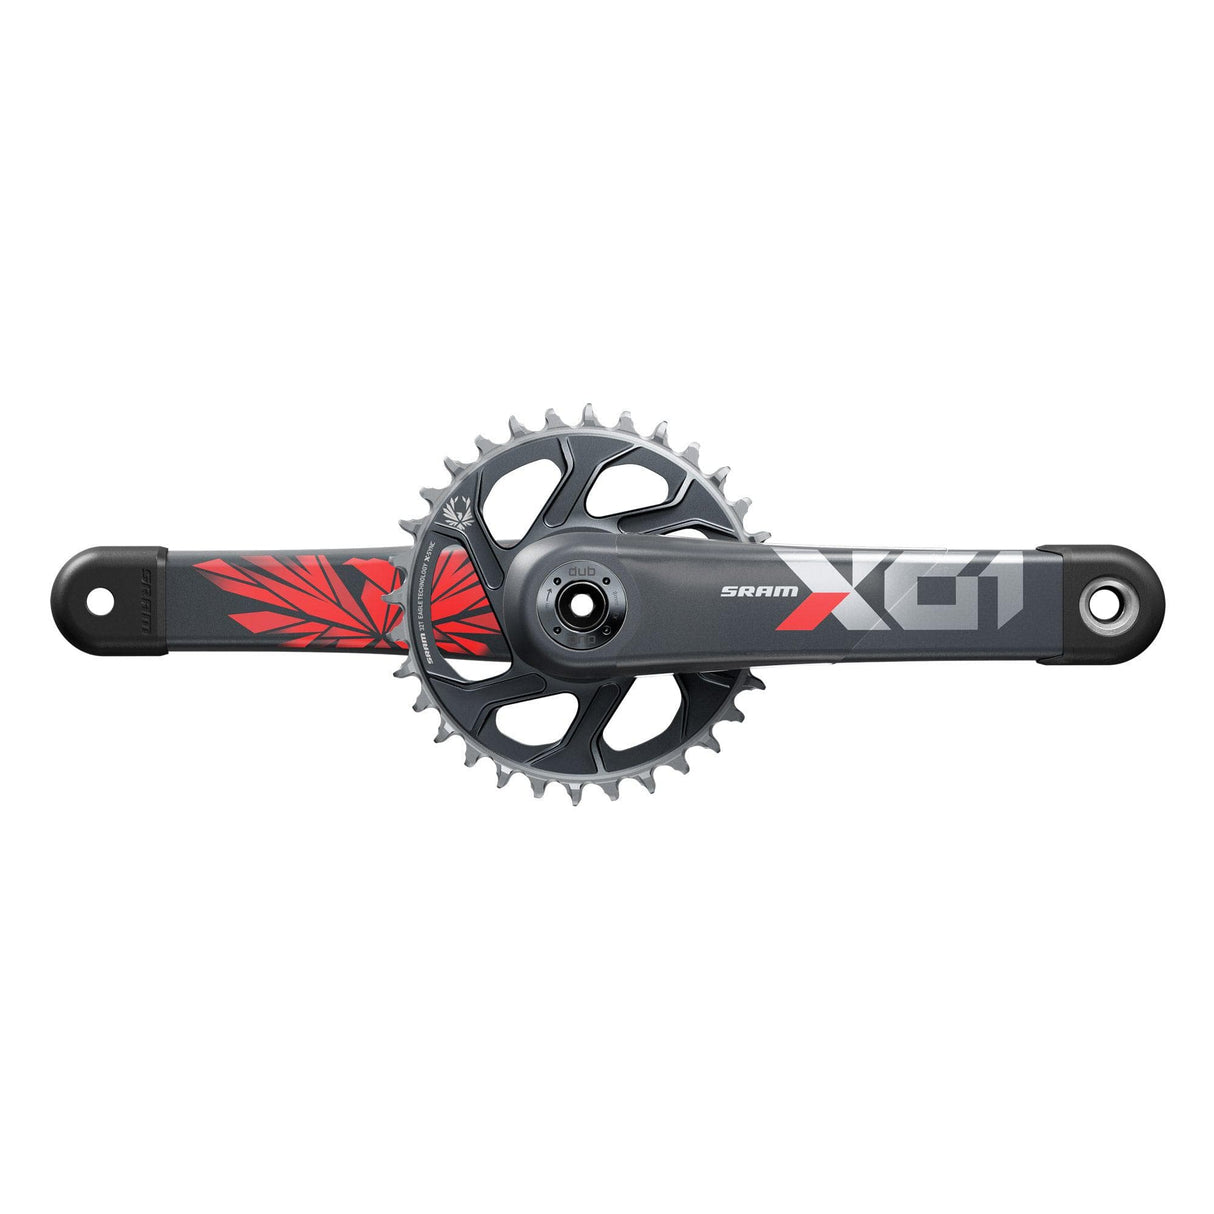 Sram Crankset X01 Eagle Boost 148 Dub 12S W Direct Mount 32T X-Sync 2 Chainring (Dub Cups/Bearings Not Included) C3: Lunar Oxy 165Mm